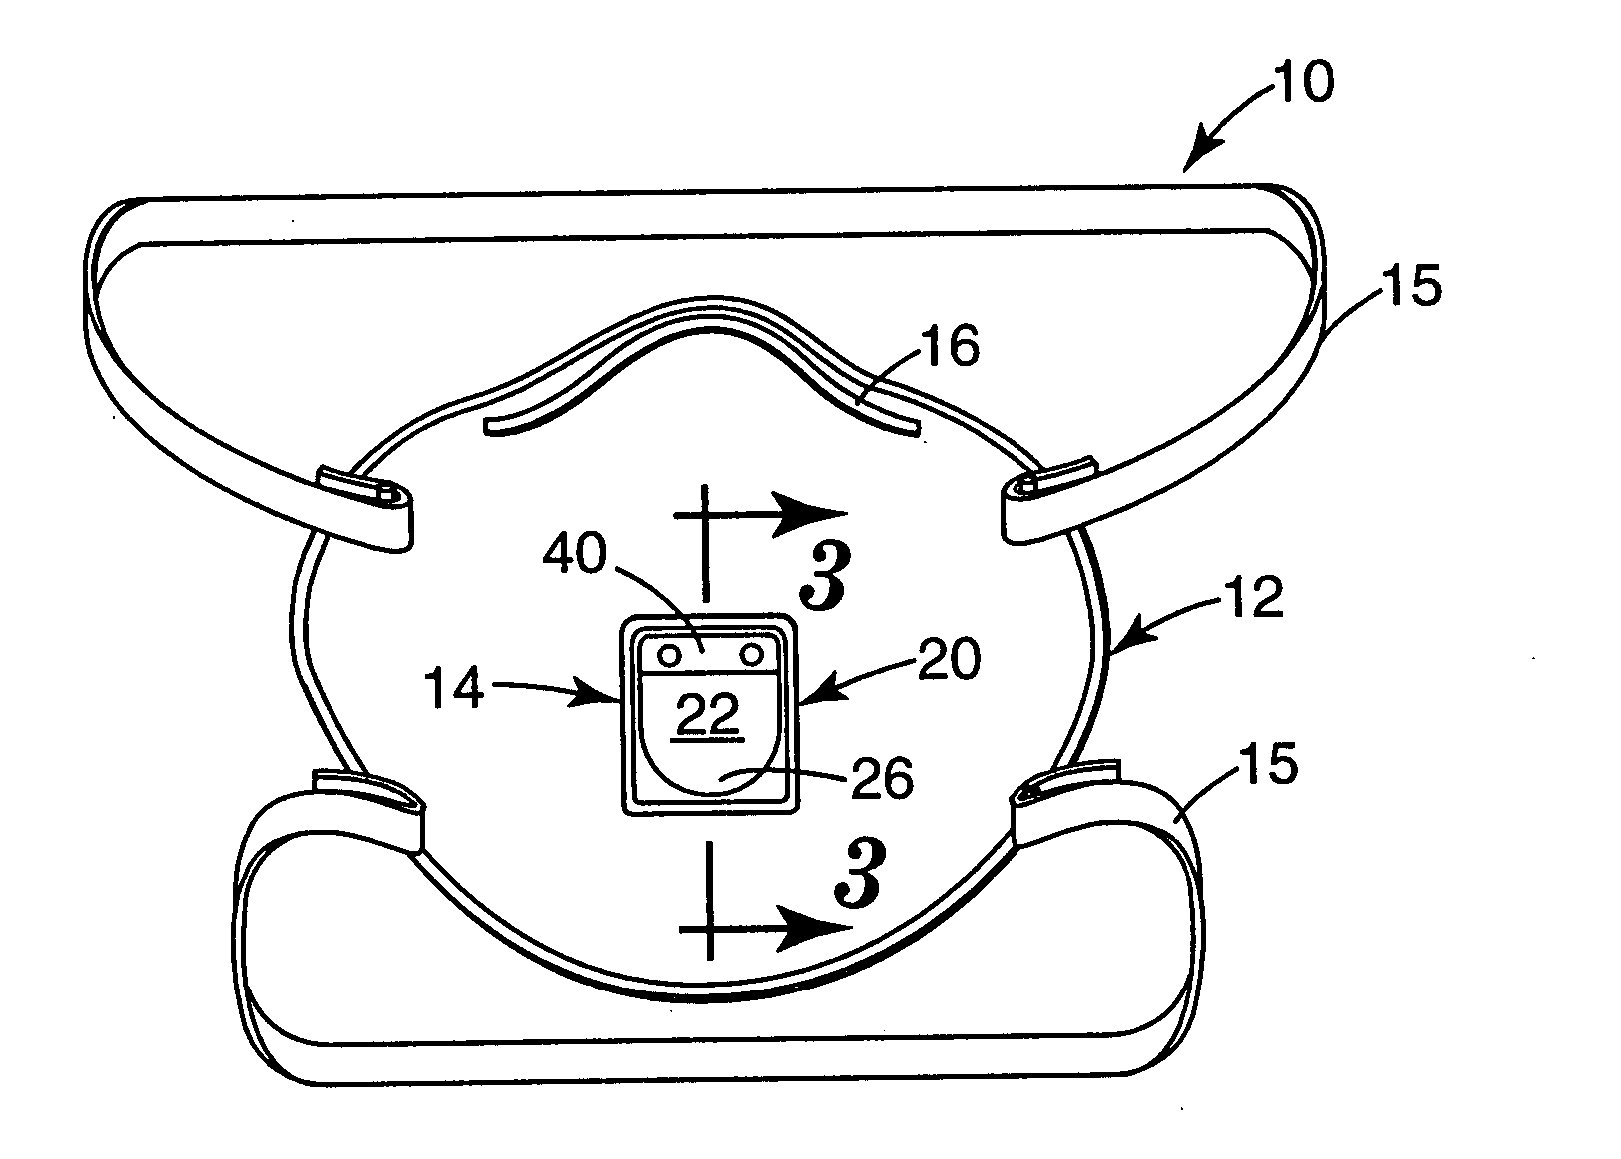 Filtering face mask that uses an exhalation valve that has a multi-layered flexible flap